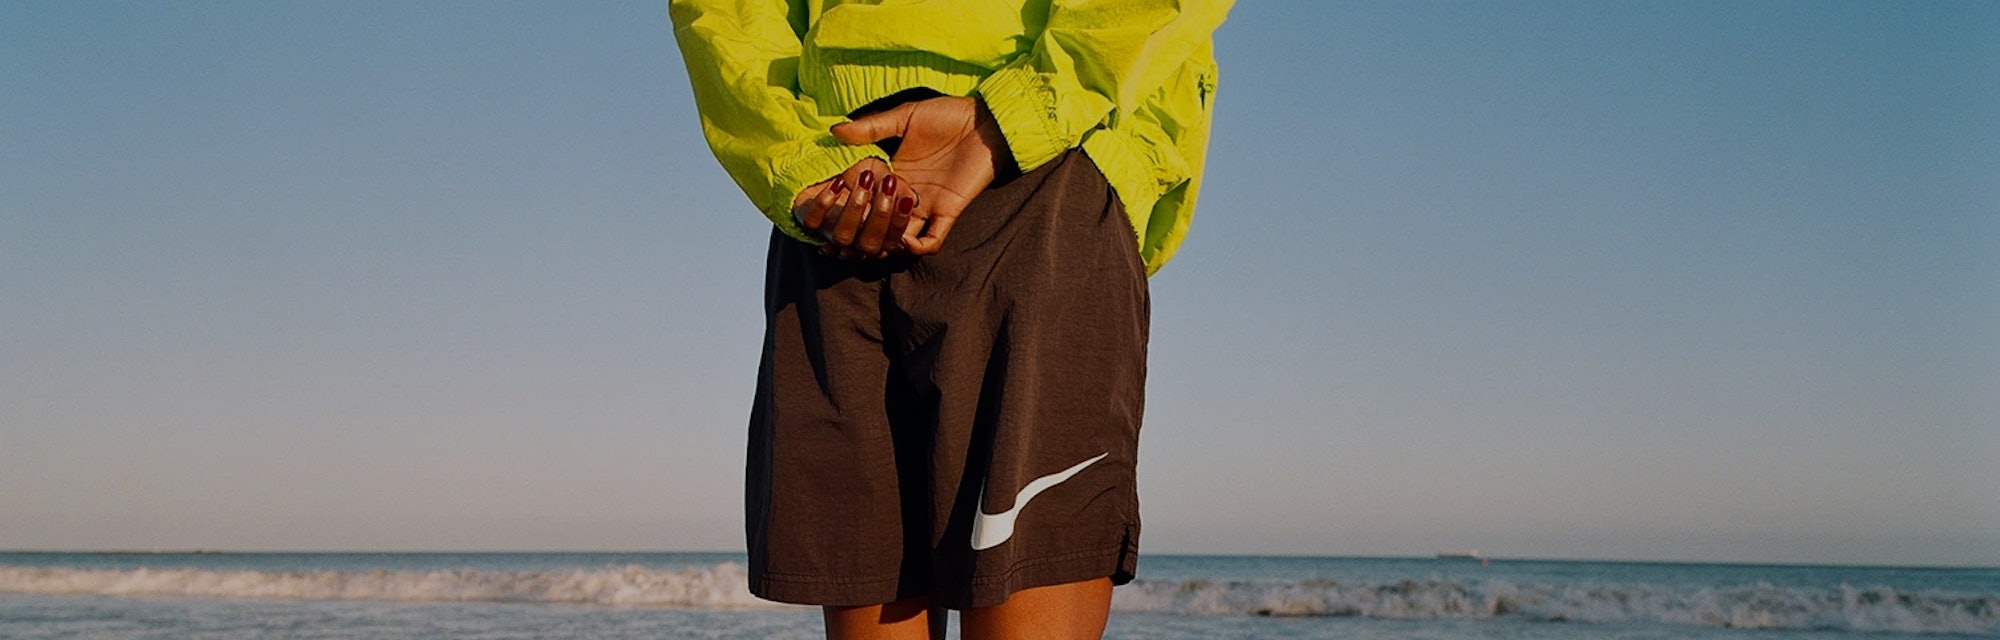 Stüssy's summer Nike capsule features sneakers, beach shorts, and more